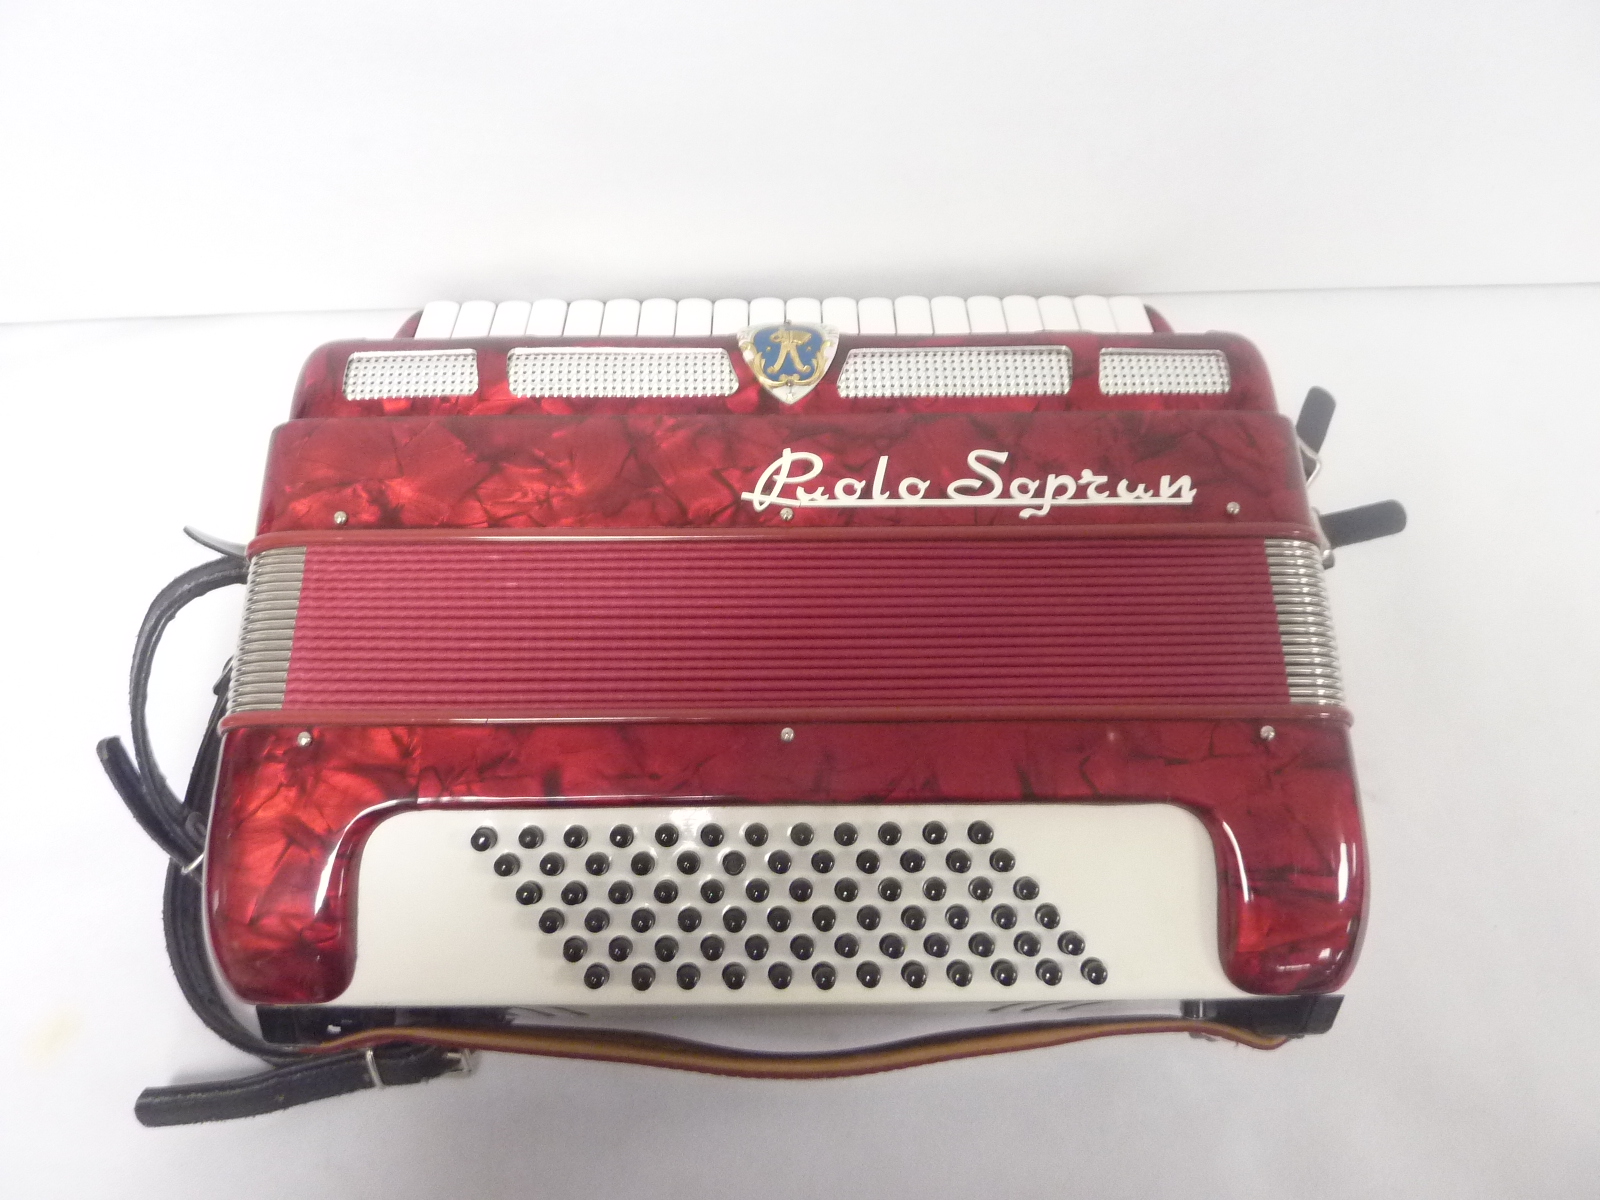 Paolo Soprani thirty-four key, seventy-two bass piano accordion, in marbled red, - Bild 4 aus 7